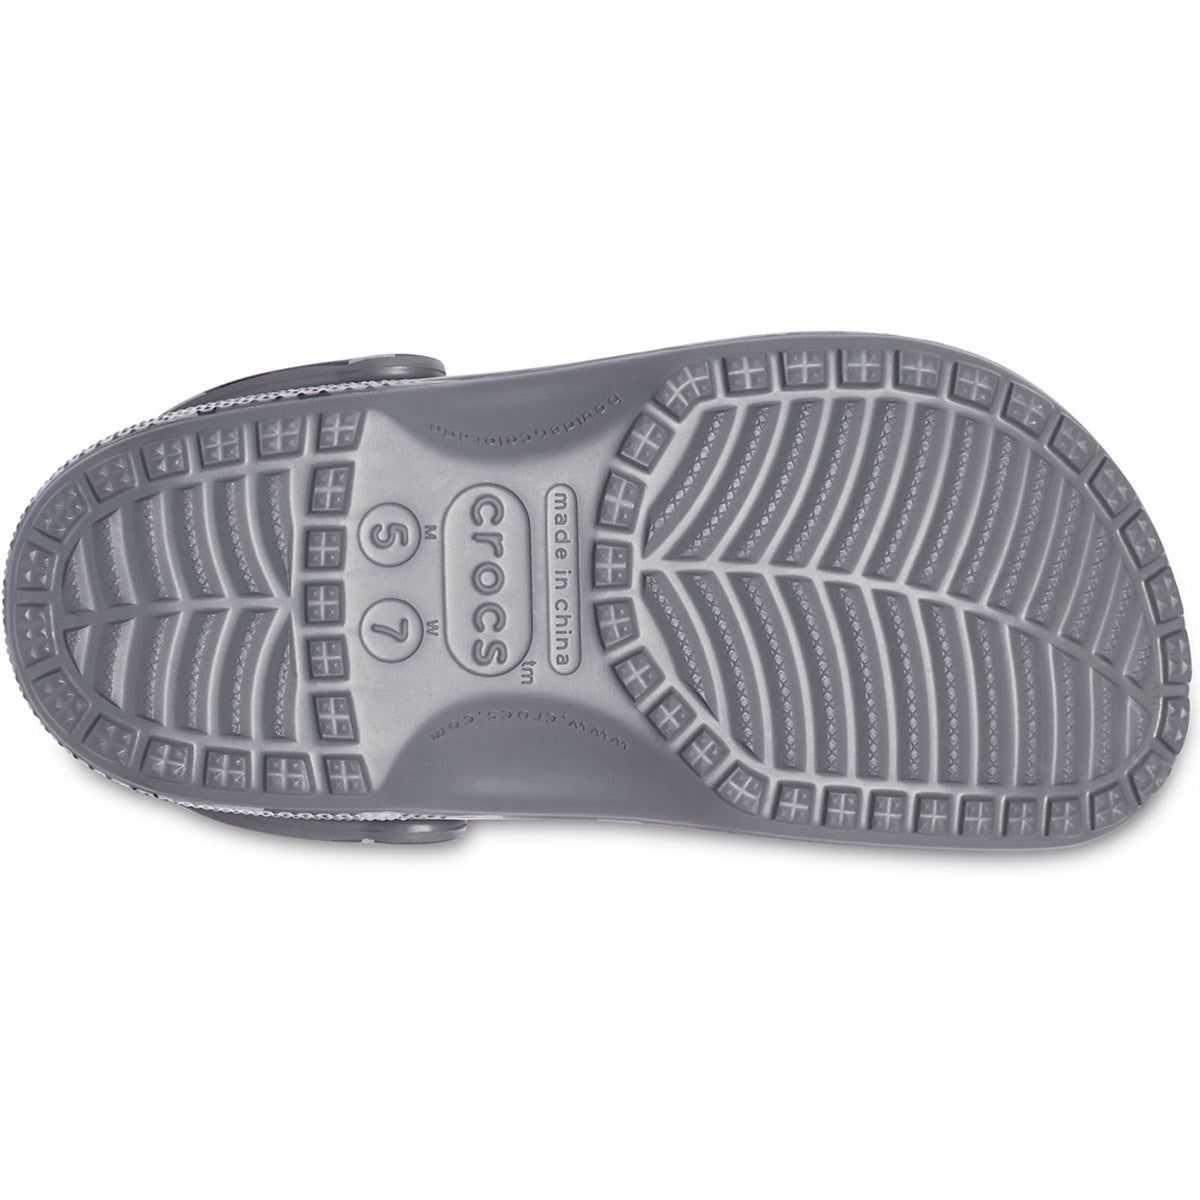 Sole of a gray Crocs Classic Camo/Slate Gray Men&#39;s shoe displaying the Crocs brand name and size, made with iconic Crocs comfort from Croslite material.